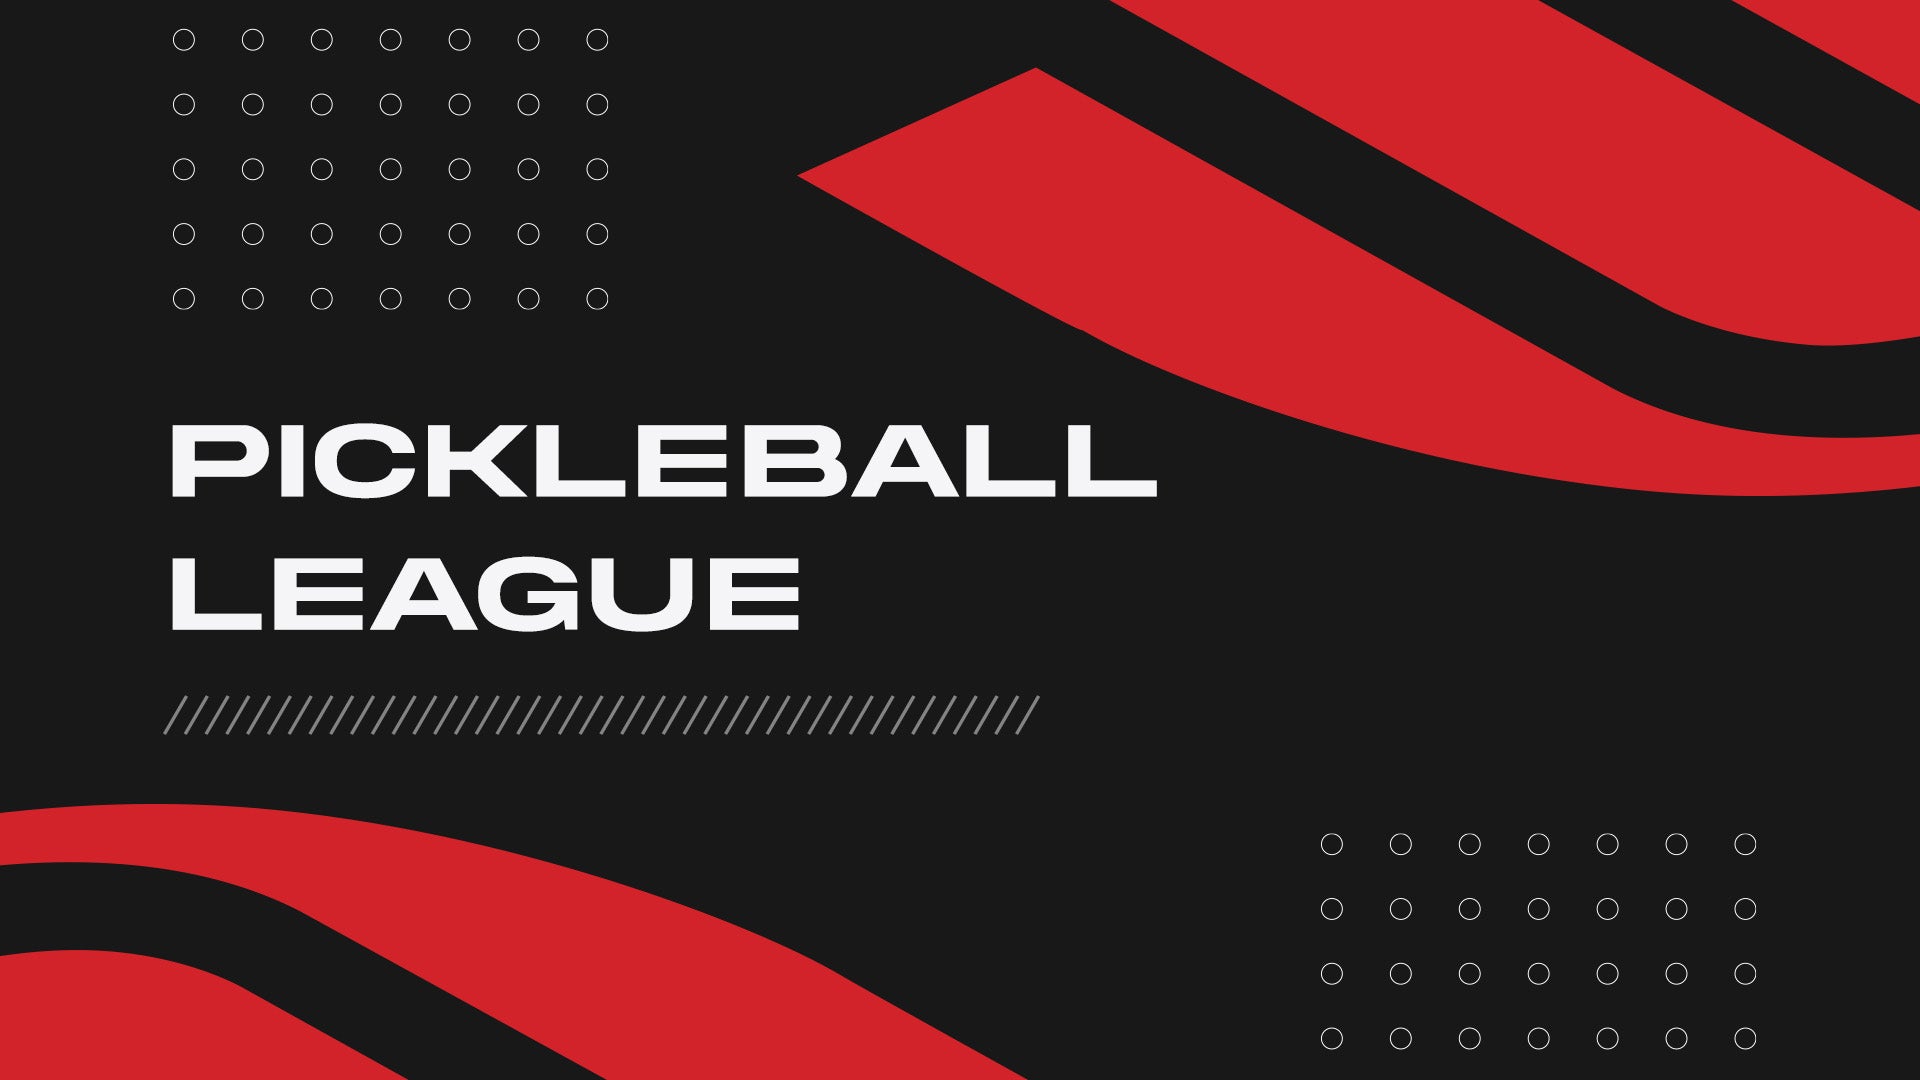 Pickleball League written over a black background with Selkirk red logo